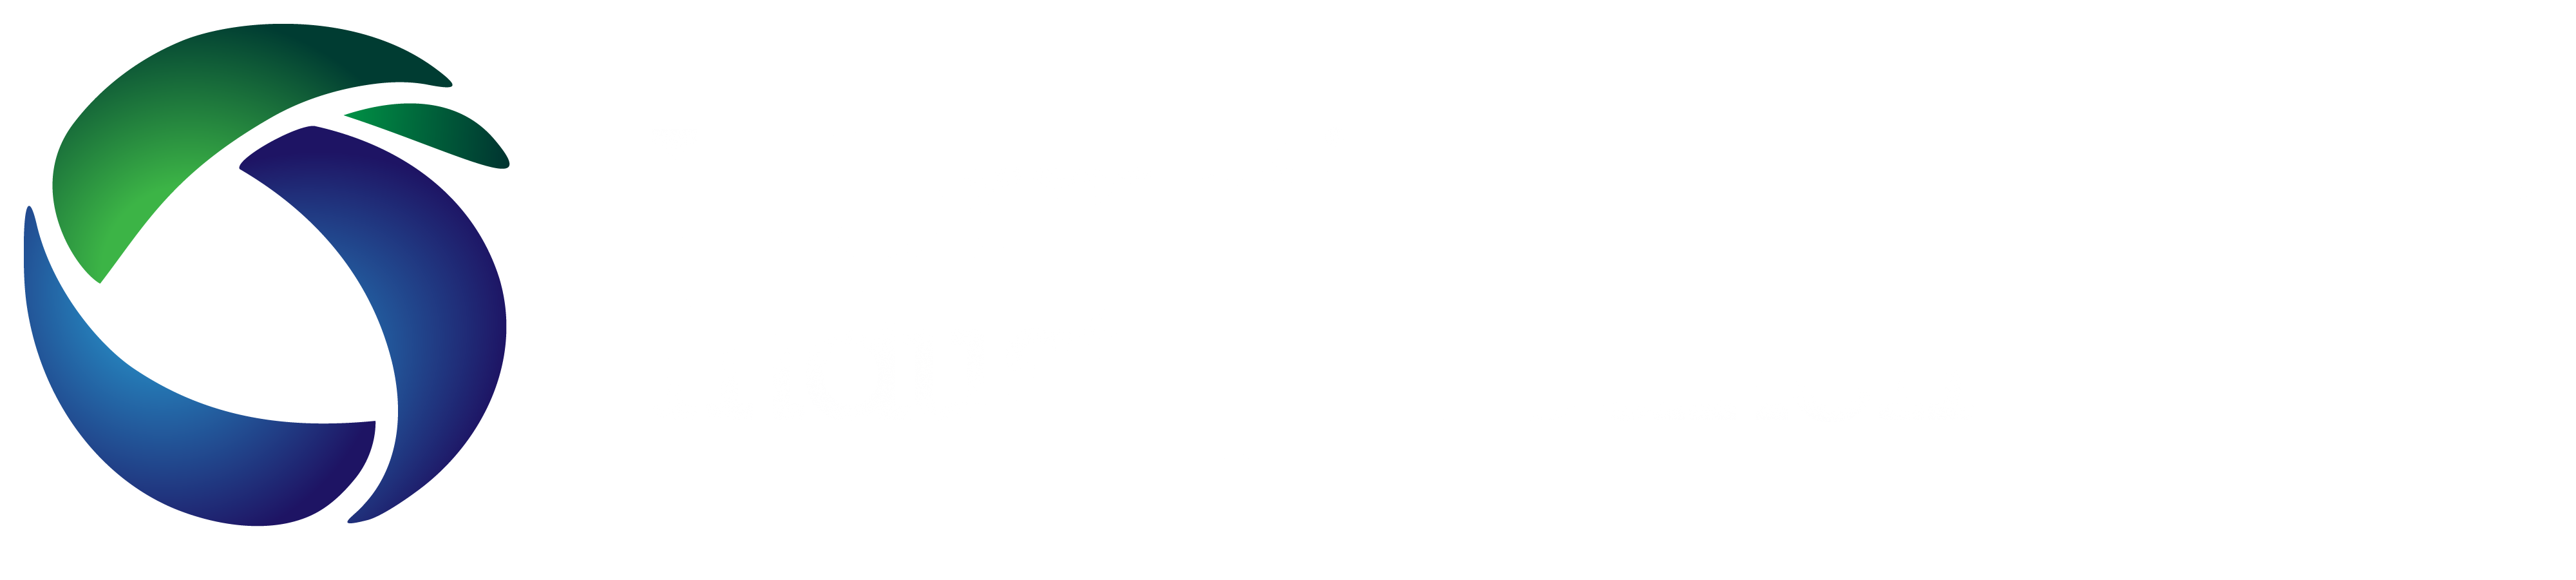 Information Technology Industry Council